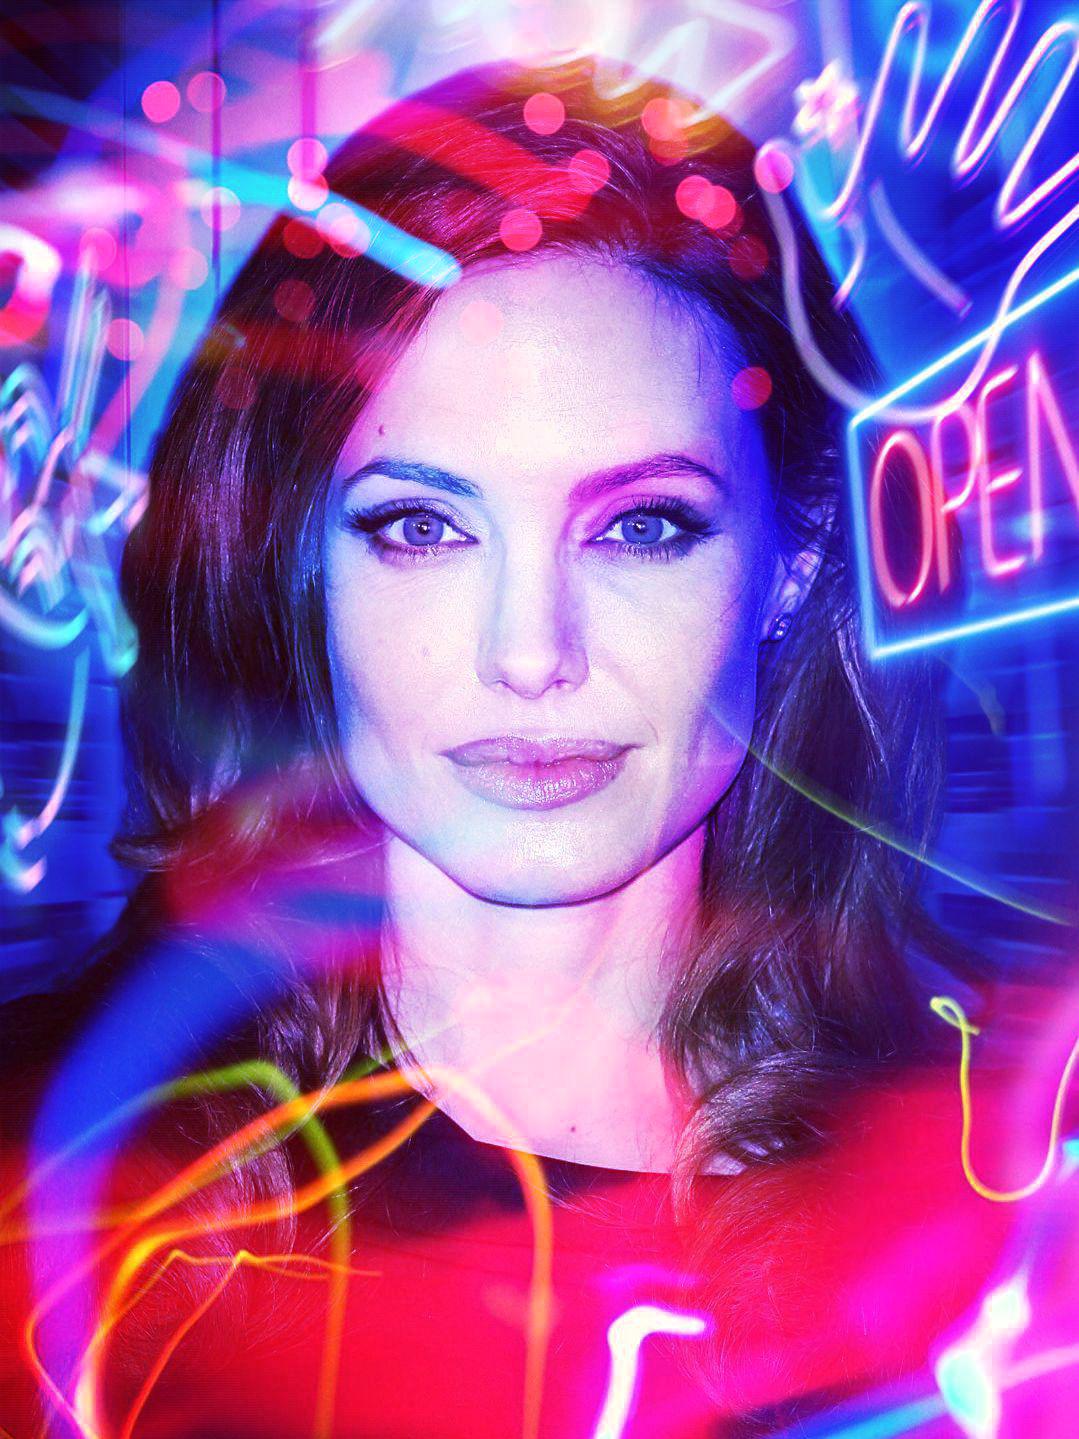 Sonny Leone Xxxxxx C - Angelina Jolie (New Year Airdrop) - ðŸ”¥ Don't Miss Out on New Hot Items ðŸ”¥ -  Celeb ART - Beautiful Artworks of Celebrities, Footballers, Politicians and  Famous People in World | OpenSea